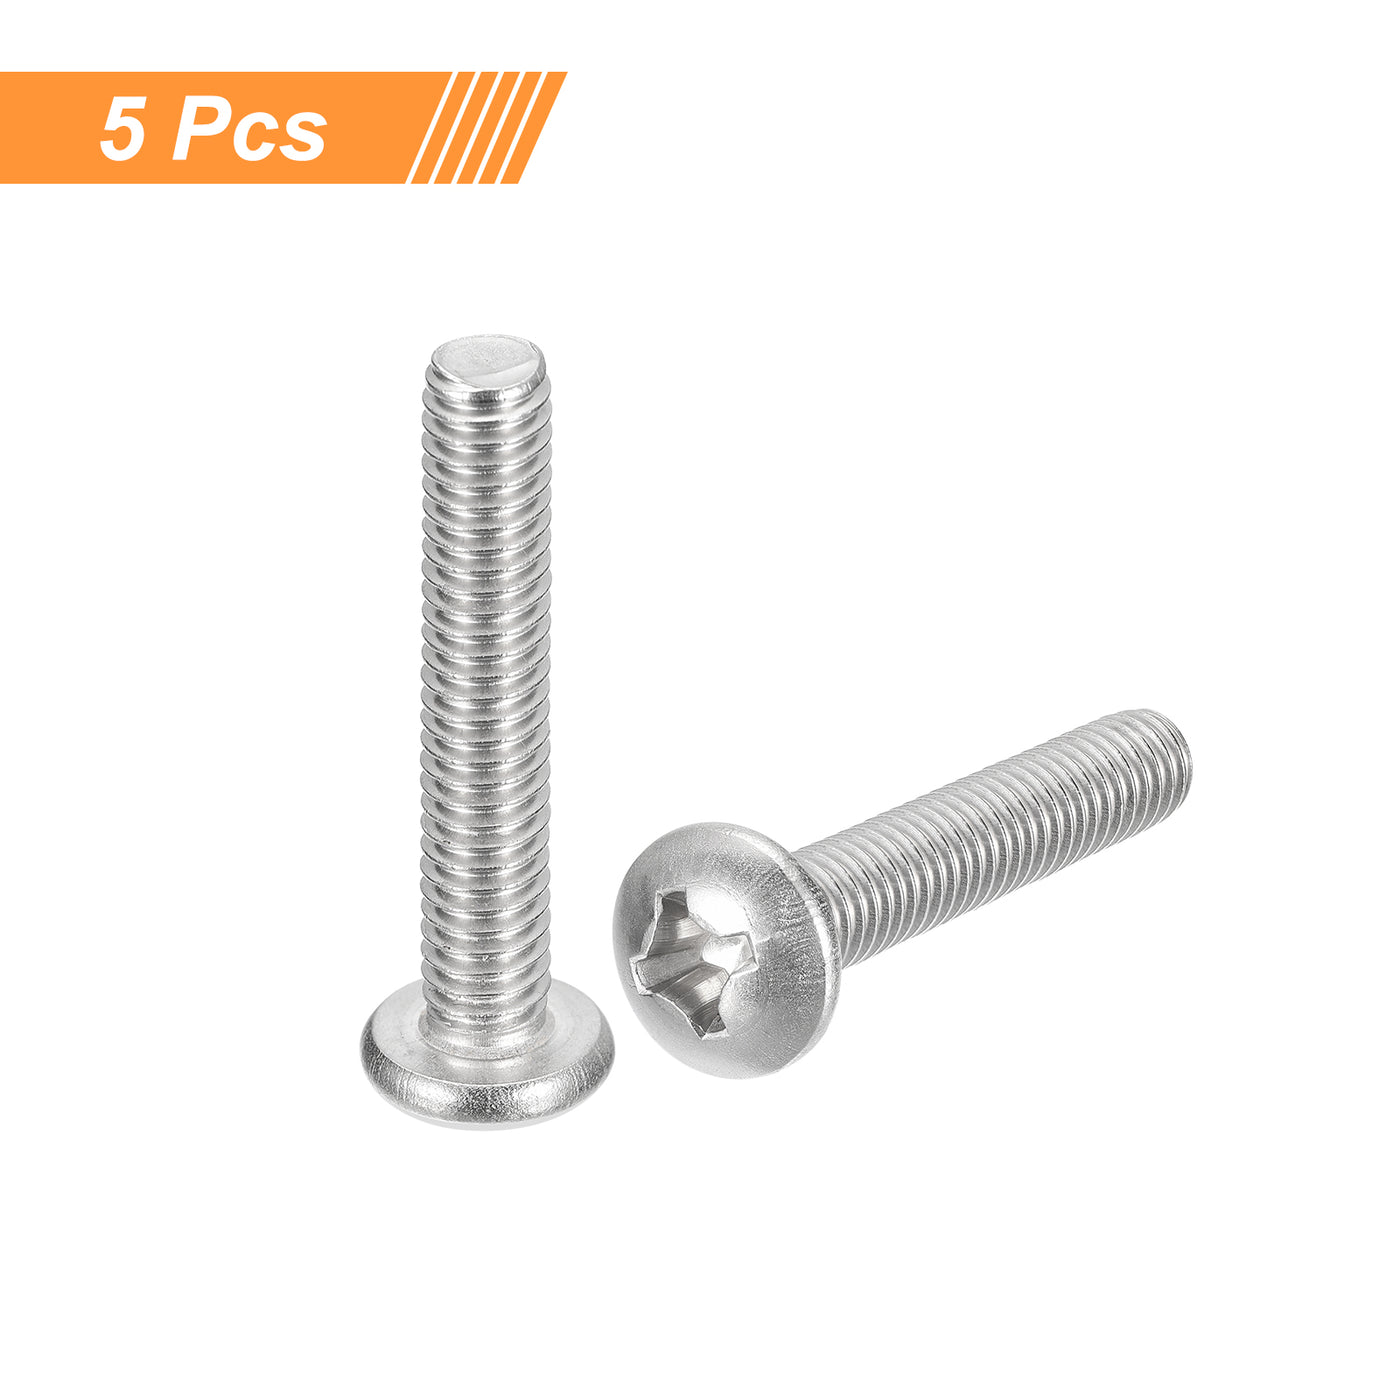 uxcell Uxcell 5/16-18x4" Pan Head Machine Screws, Stainless Steel 18-8 Screw, Pack of 5